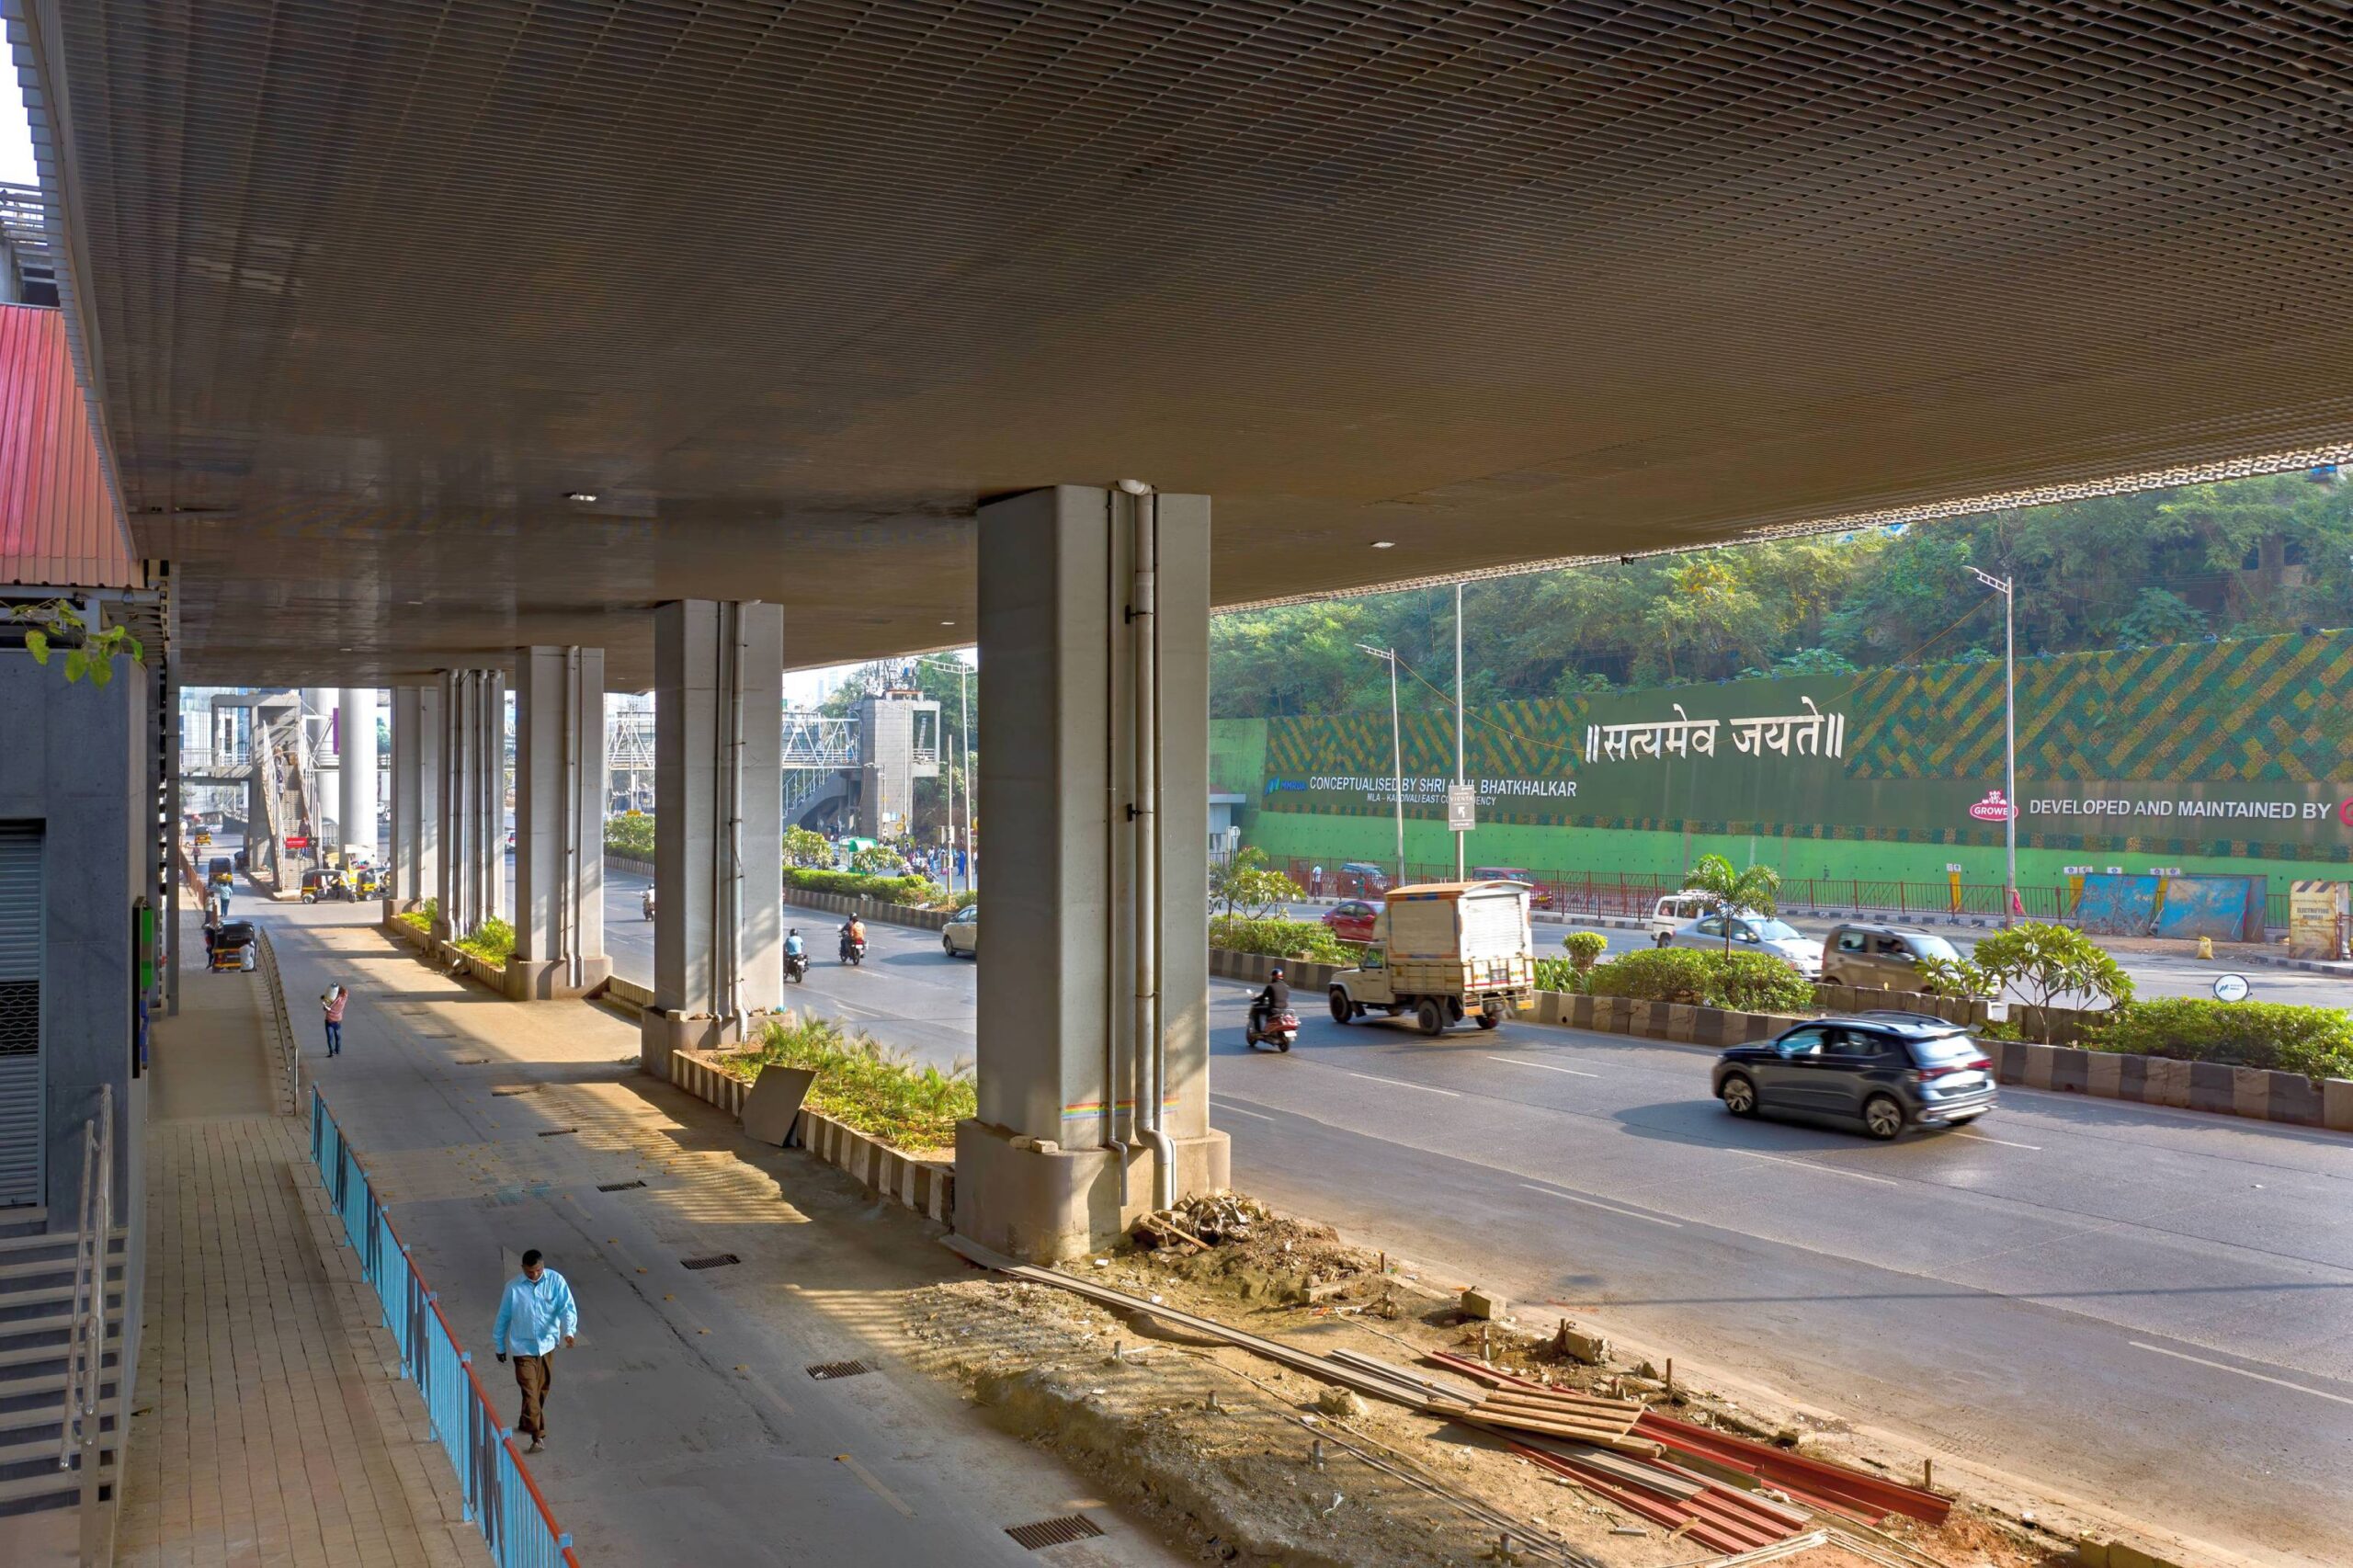 Mumbai Metro Stations-A case for Architects and Architecture-Sourabh Gupta, Archohm 83